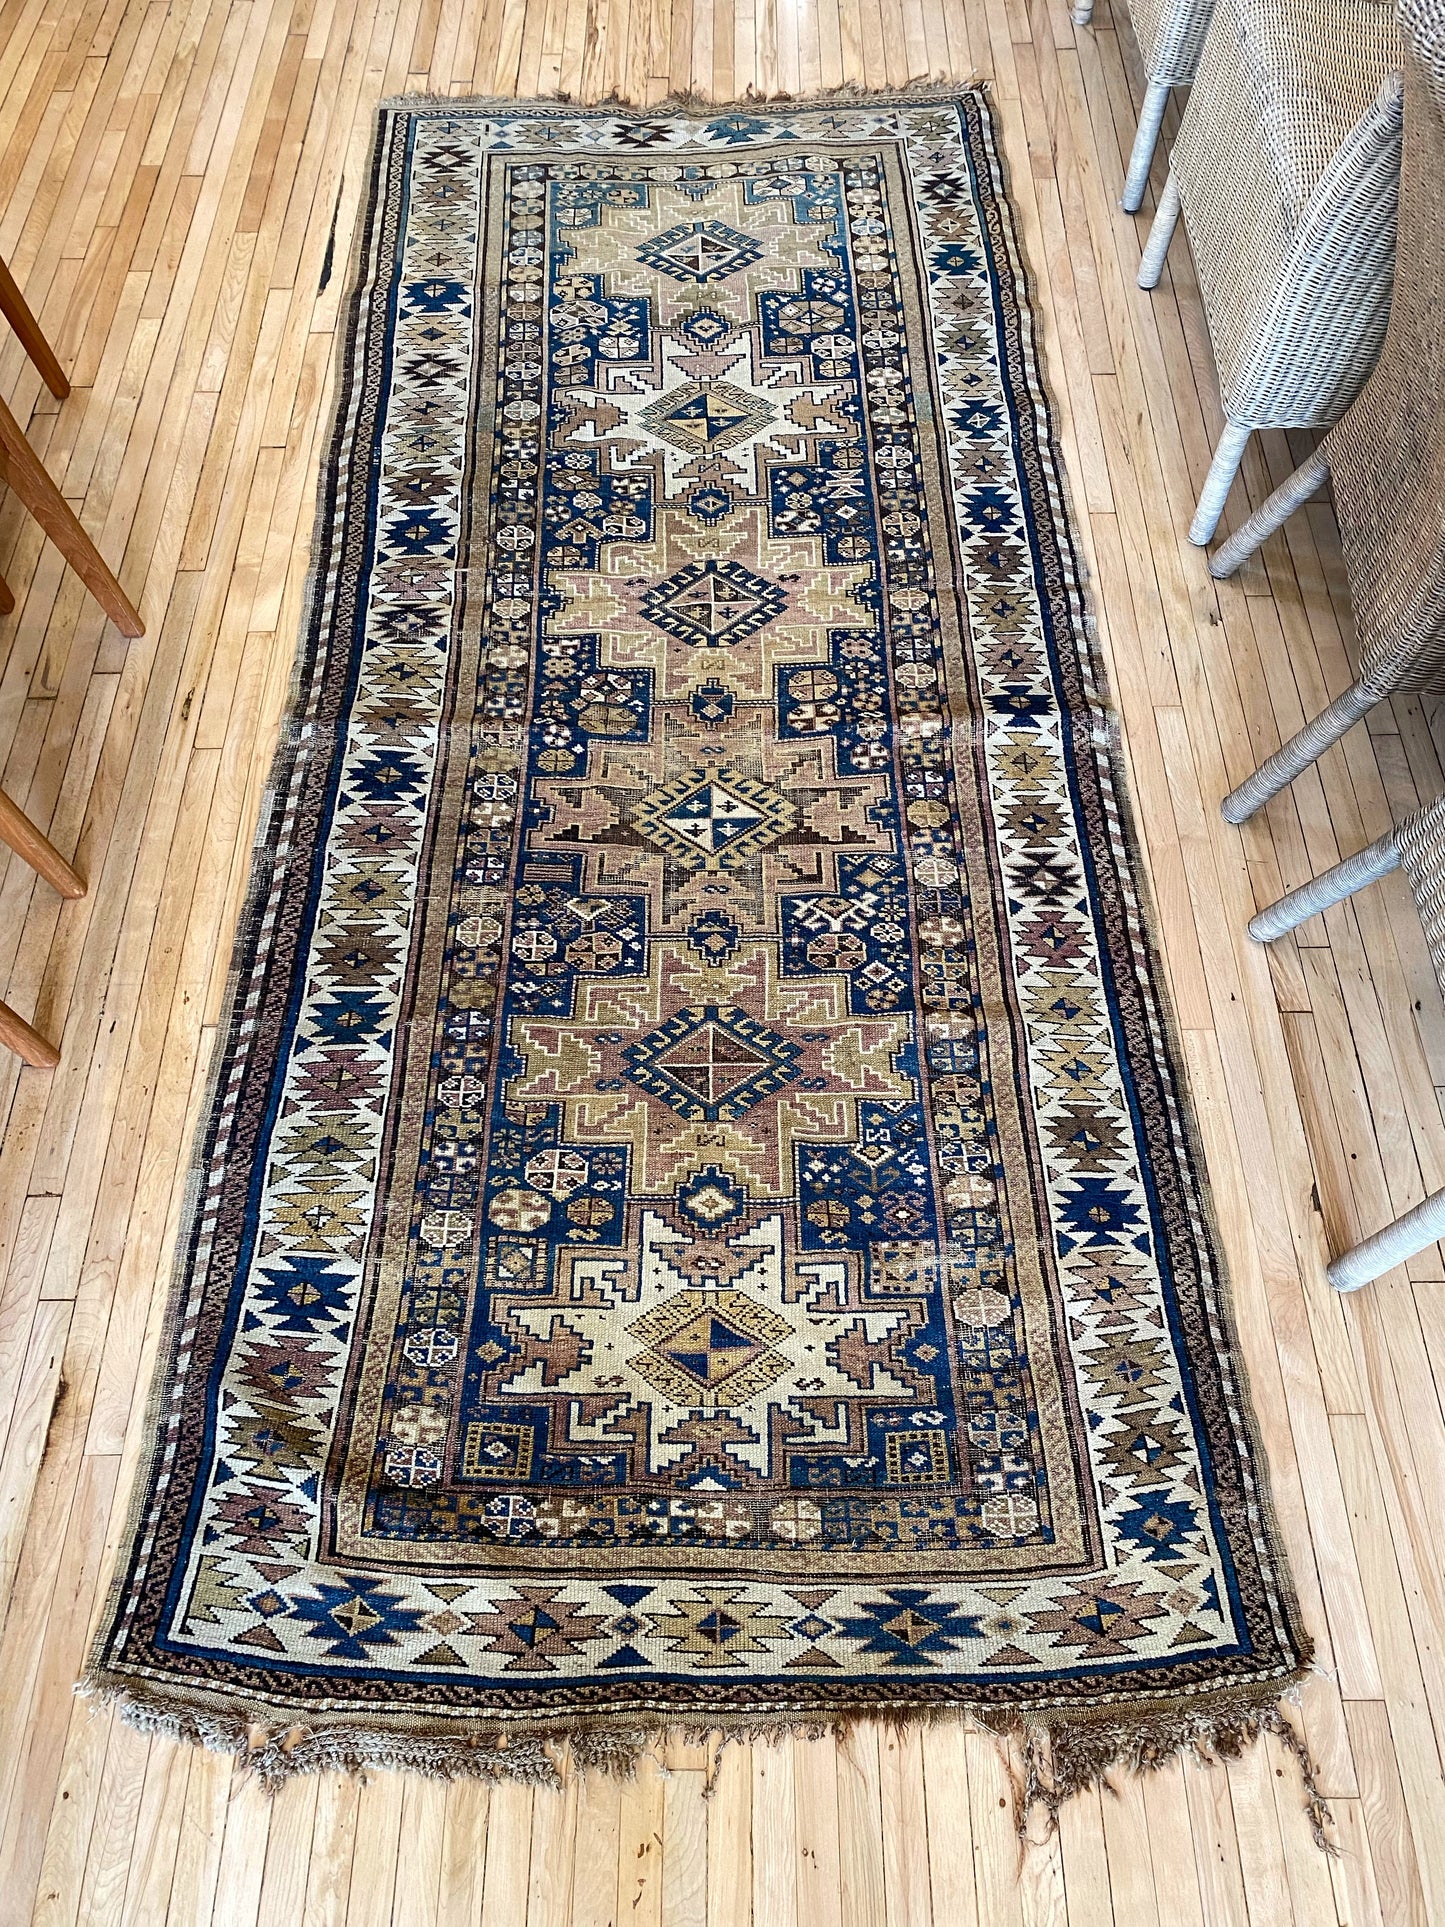 "CARRINGTON" Antique Hand-knotted Wool Runner Rug (8’6” x 3’8”)